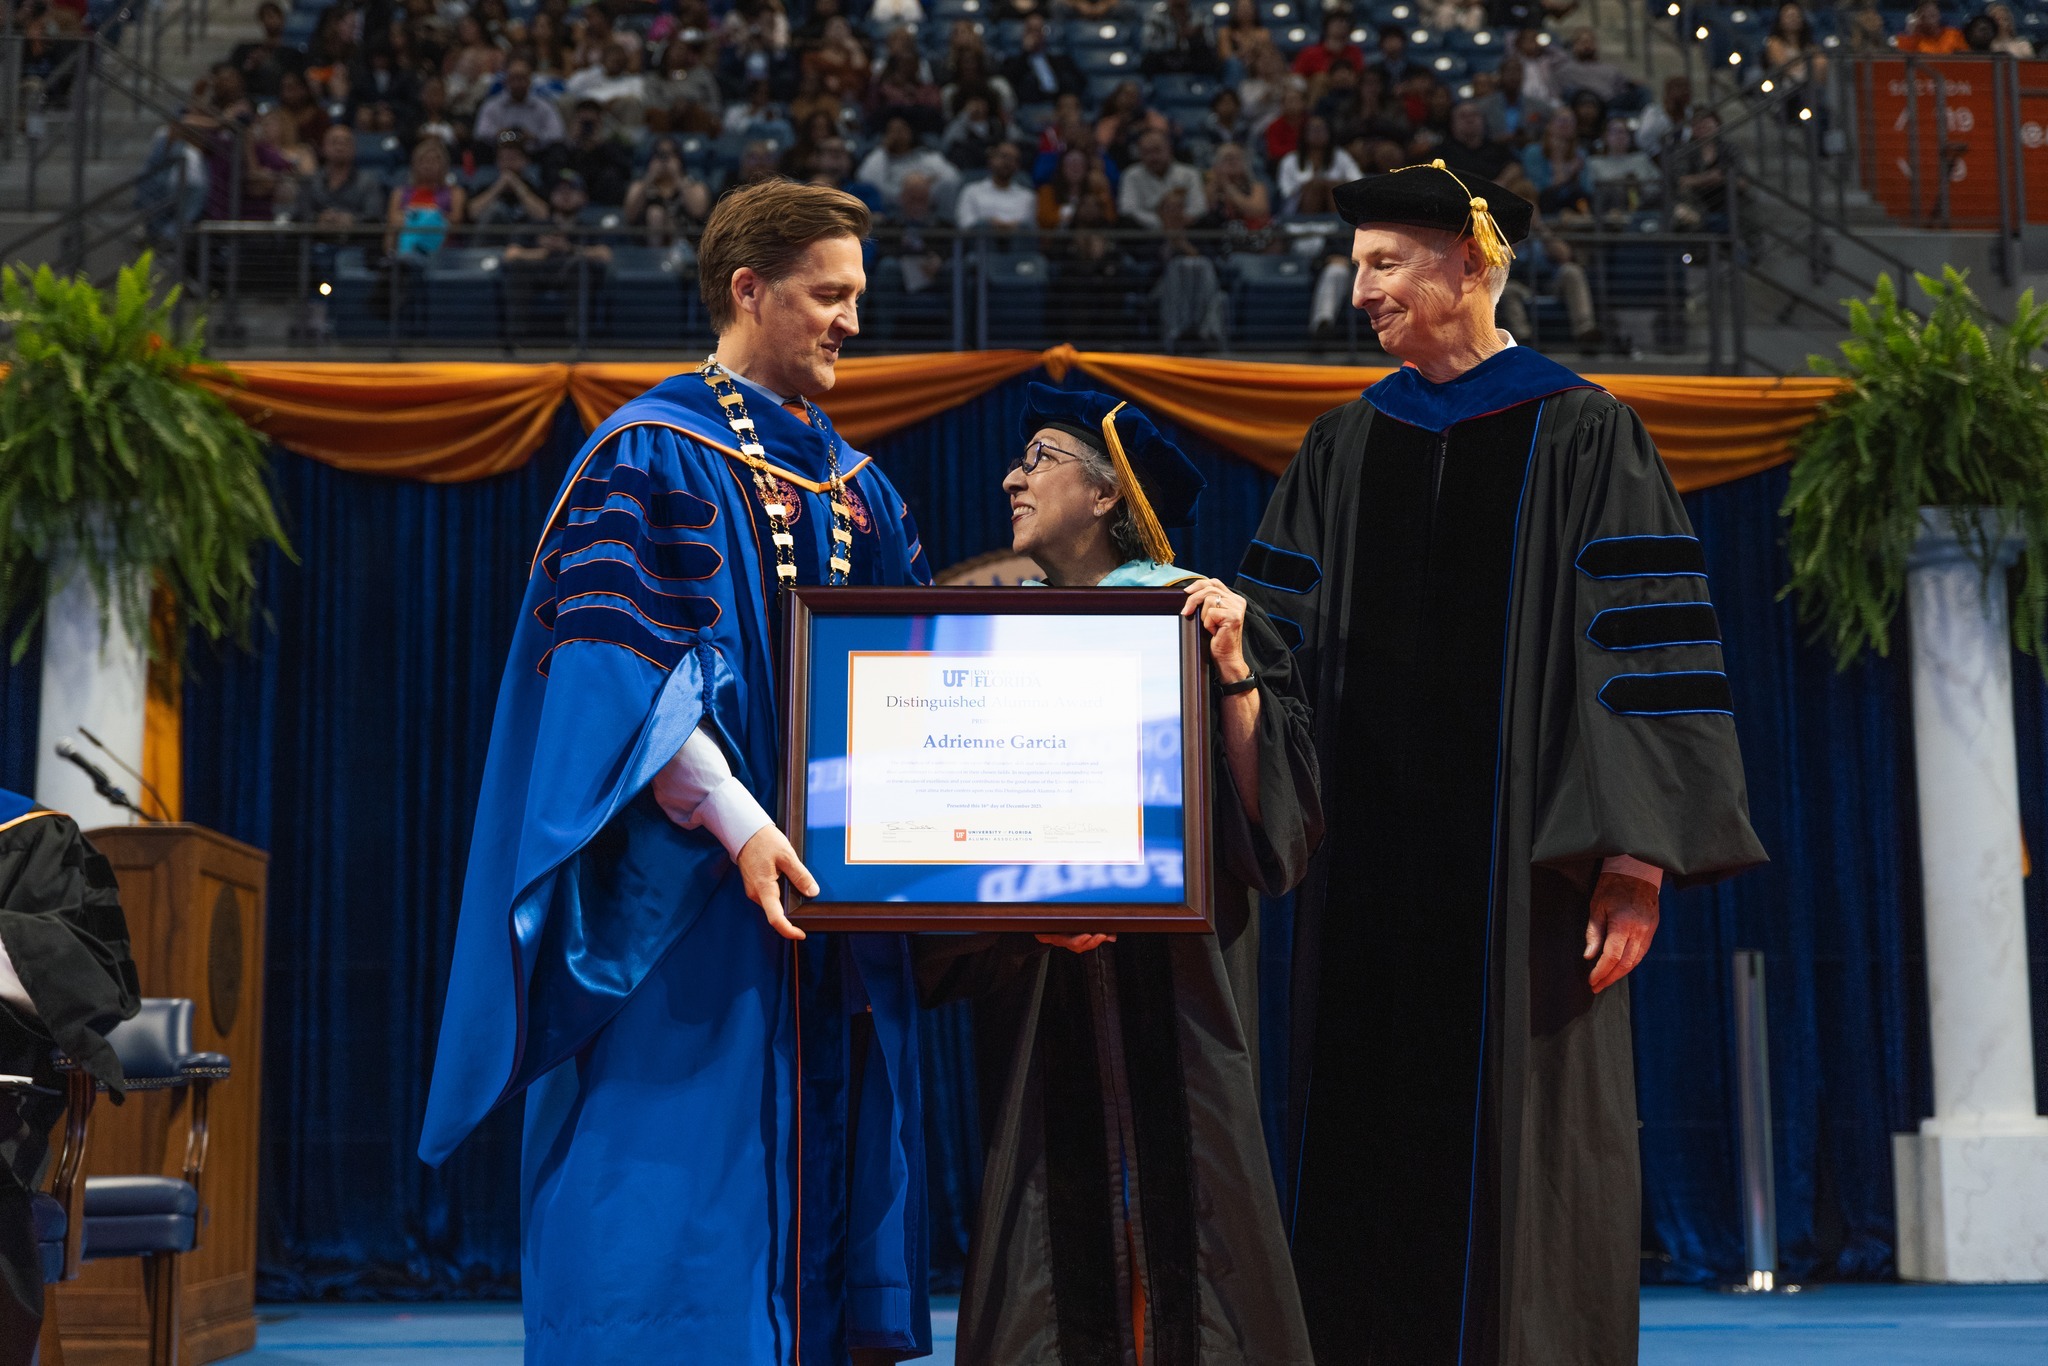 This is an image from the fall doctoral commencement ceremony. The photo captures a moment when Adrienne Garcia, in academic regalia, is receiving the UF Distinguished Alumni award. UF President Ben Sasse and UF College of Education Dean Glenn Good are on either side of her on the stage, also in academic regalia. The background shows an audience seated, watching the ceremony. The stage is decorated with orange and blue colors.